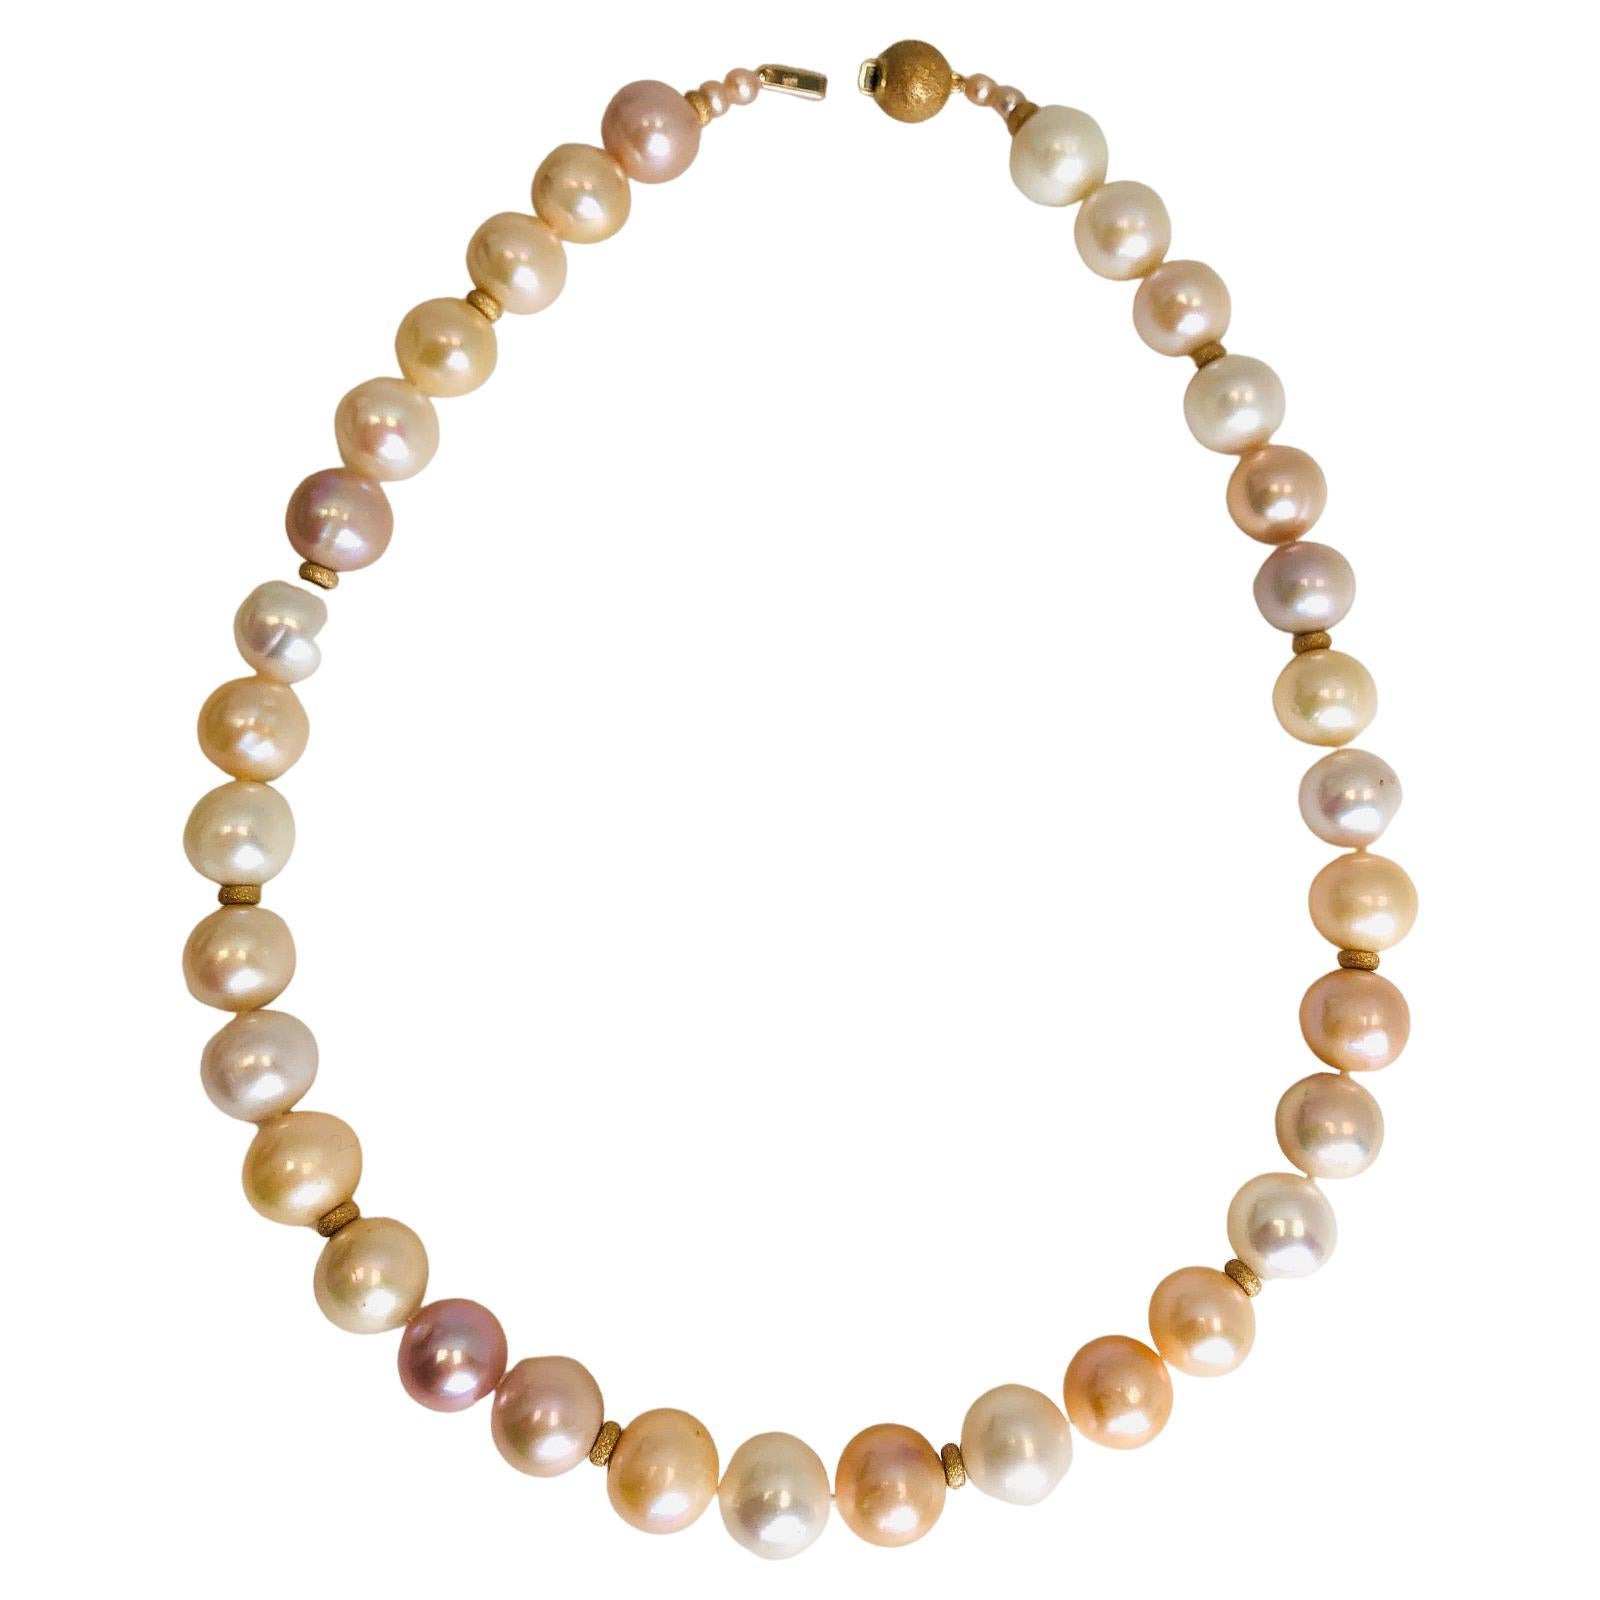 12-13mm Peach Freshwater Pearl Necklace with 14k Yellow Gold Accents